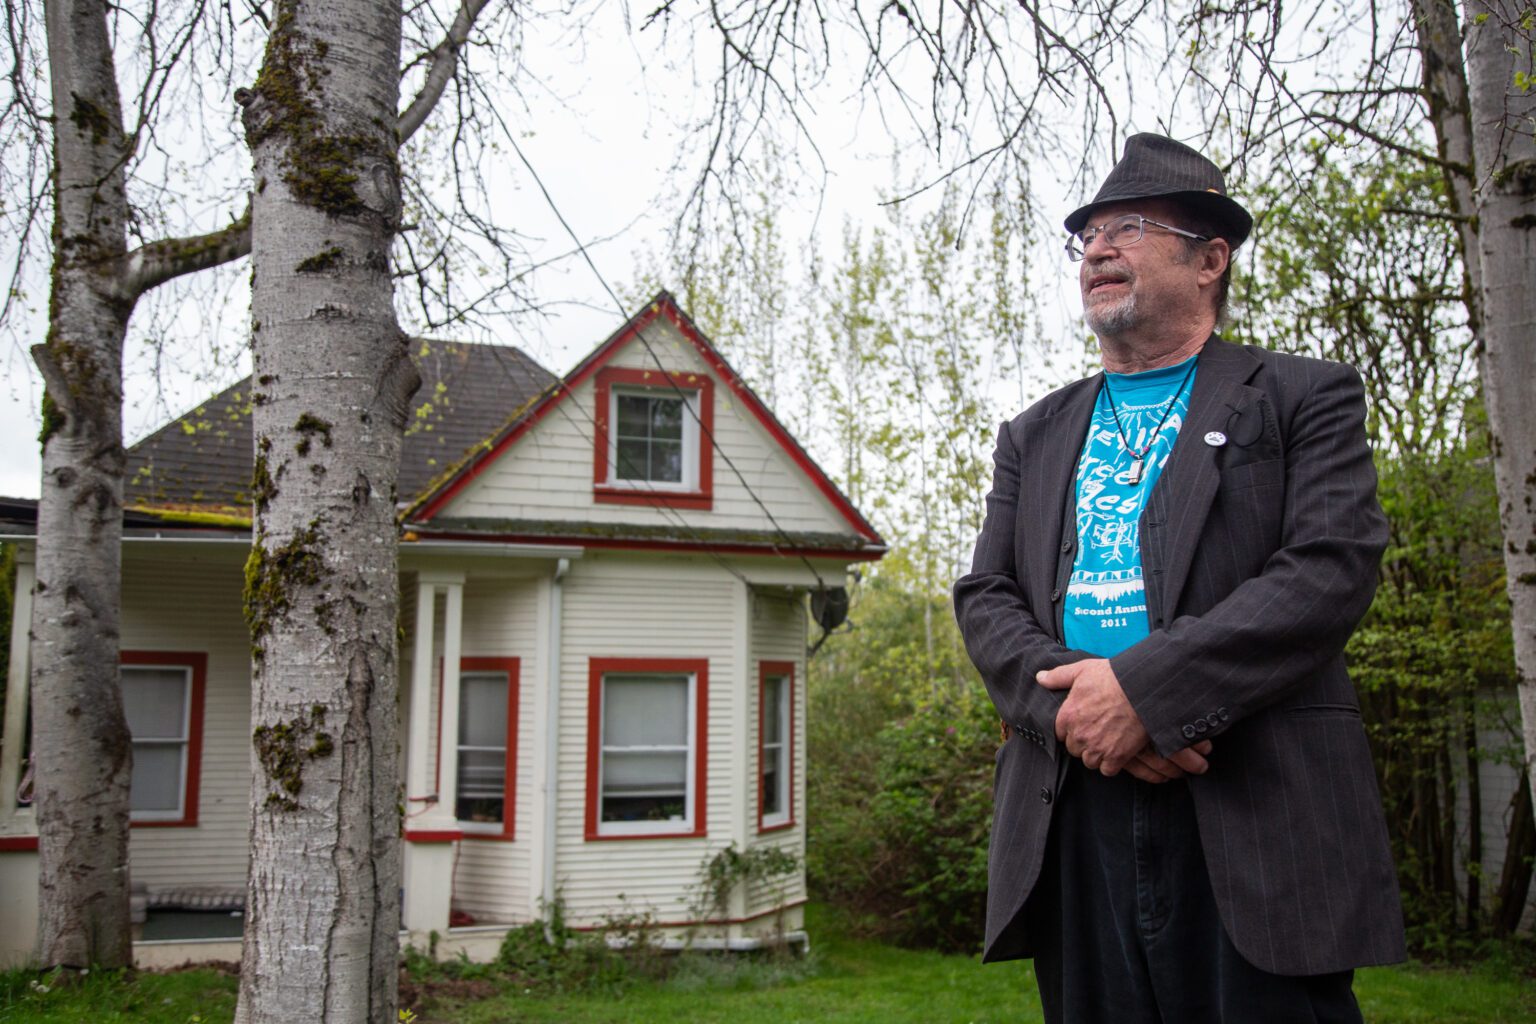 Andy Koch stands outside of his former home on 21st Street in Bellingham. He rented the home for several decades until his landlord died suddenly in 2018. Koch re-entered an unfamiliar world of rentals